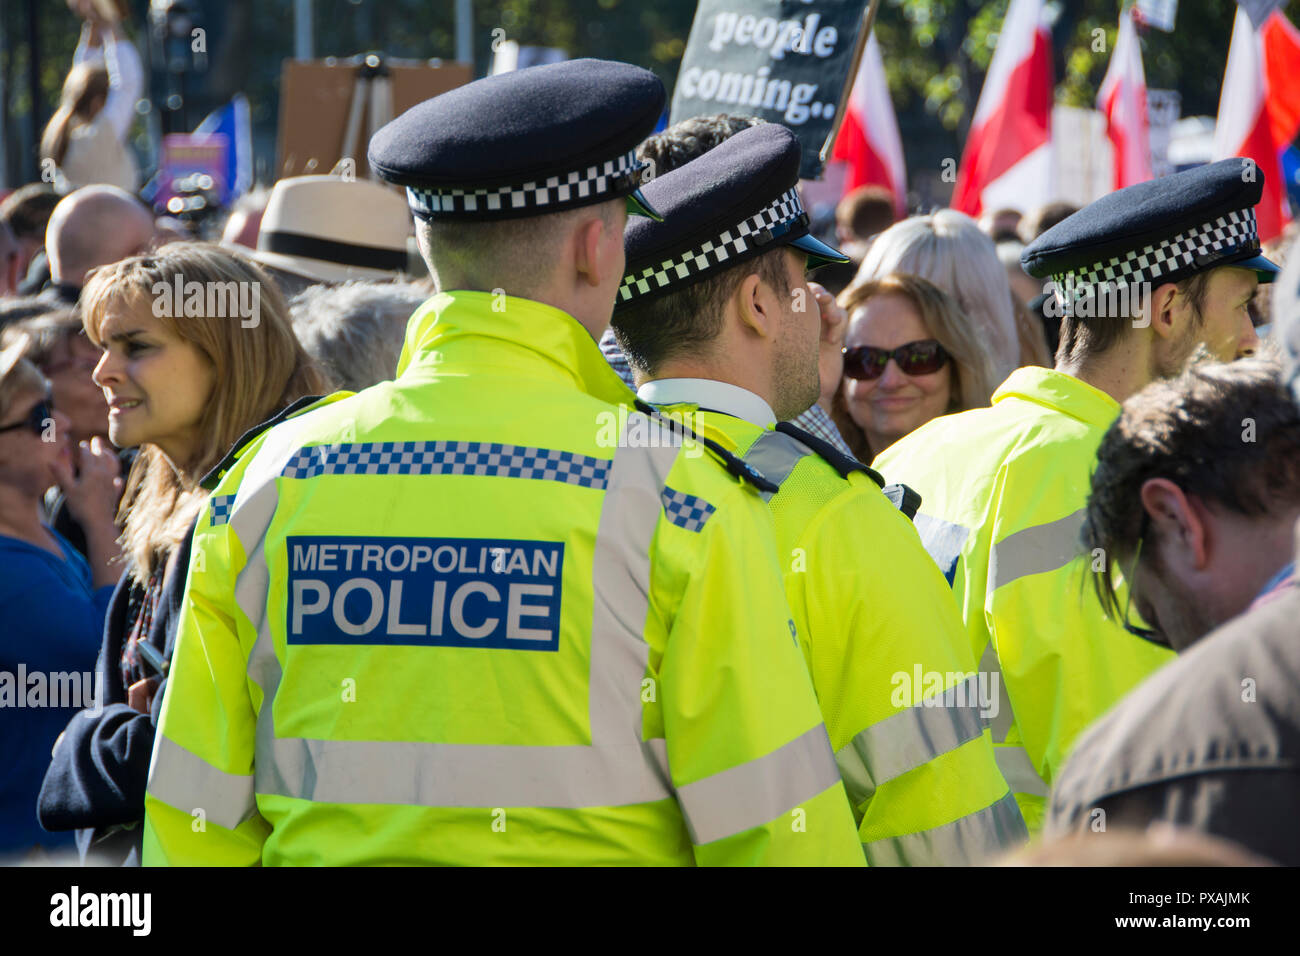 Policemen (Bobbies) on the beat in Parliament Square, Westminster, London, UK Stock Photo